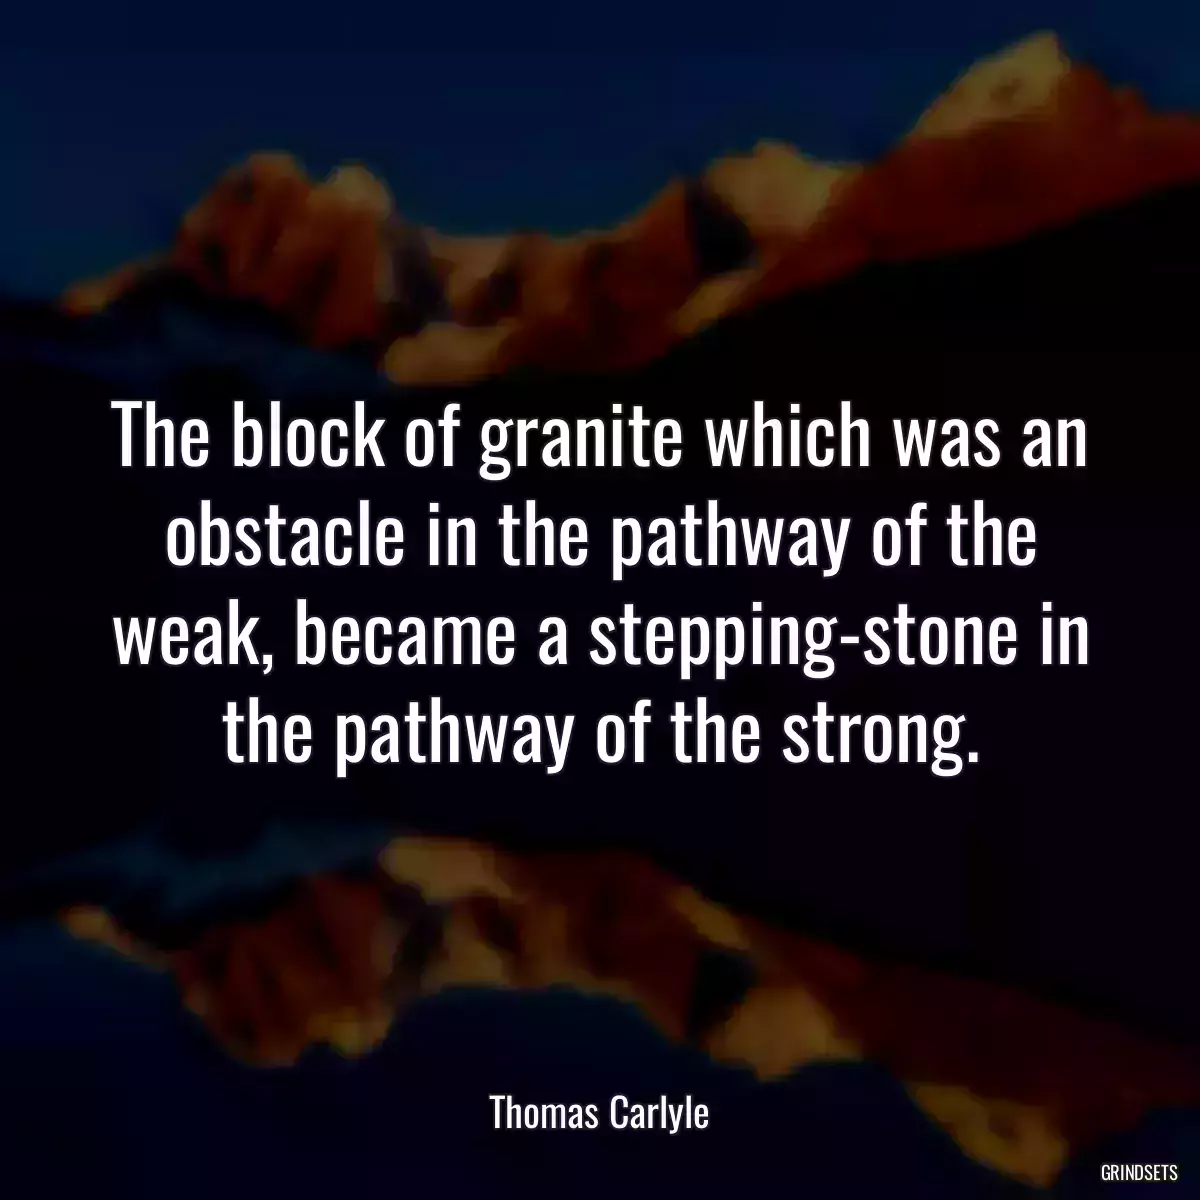 The block of granite which was an obstacle in the pathway of the weak, became a stepping-stone in the pathway of the strong.